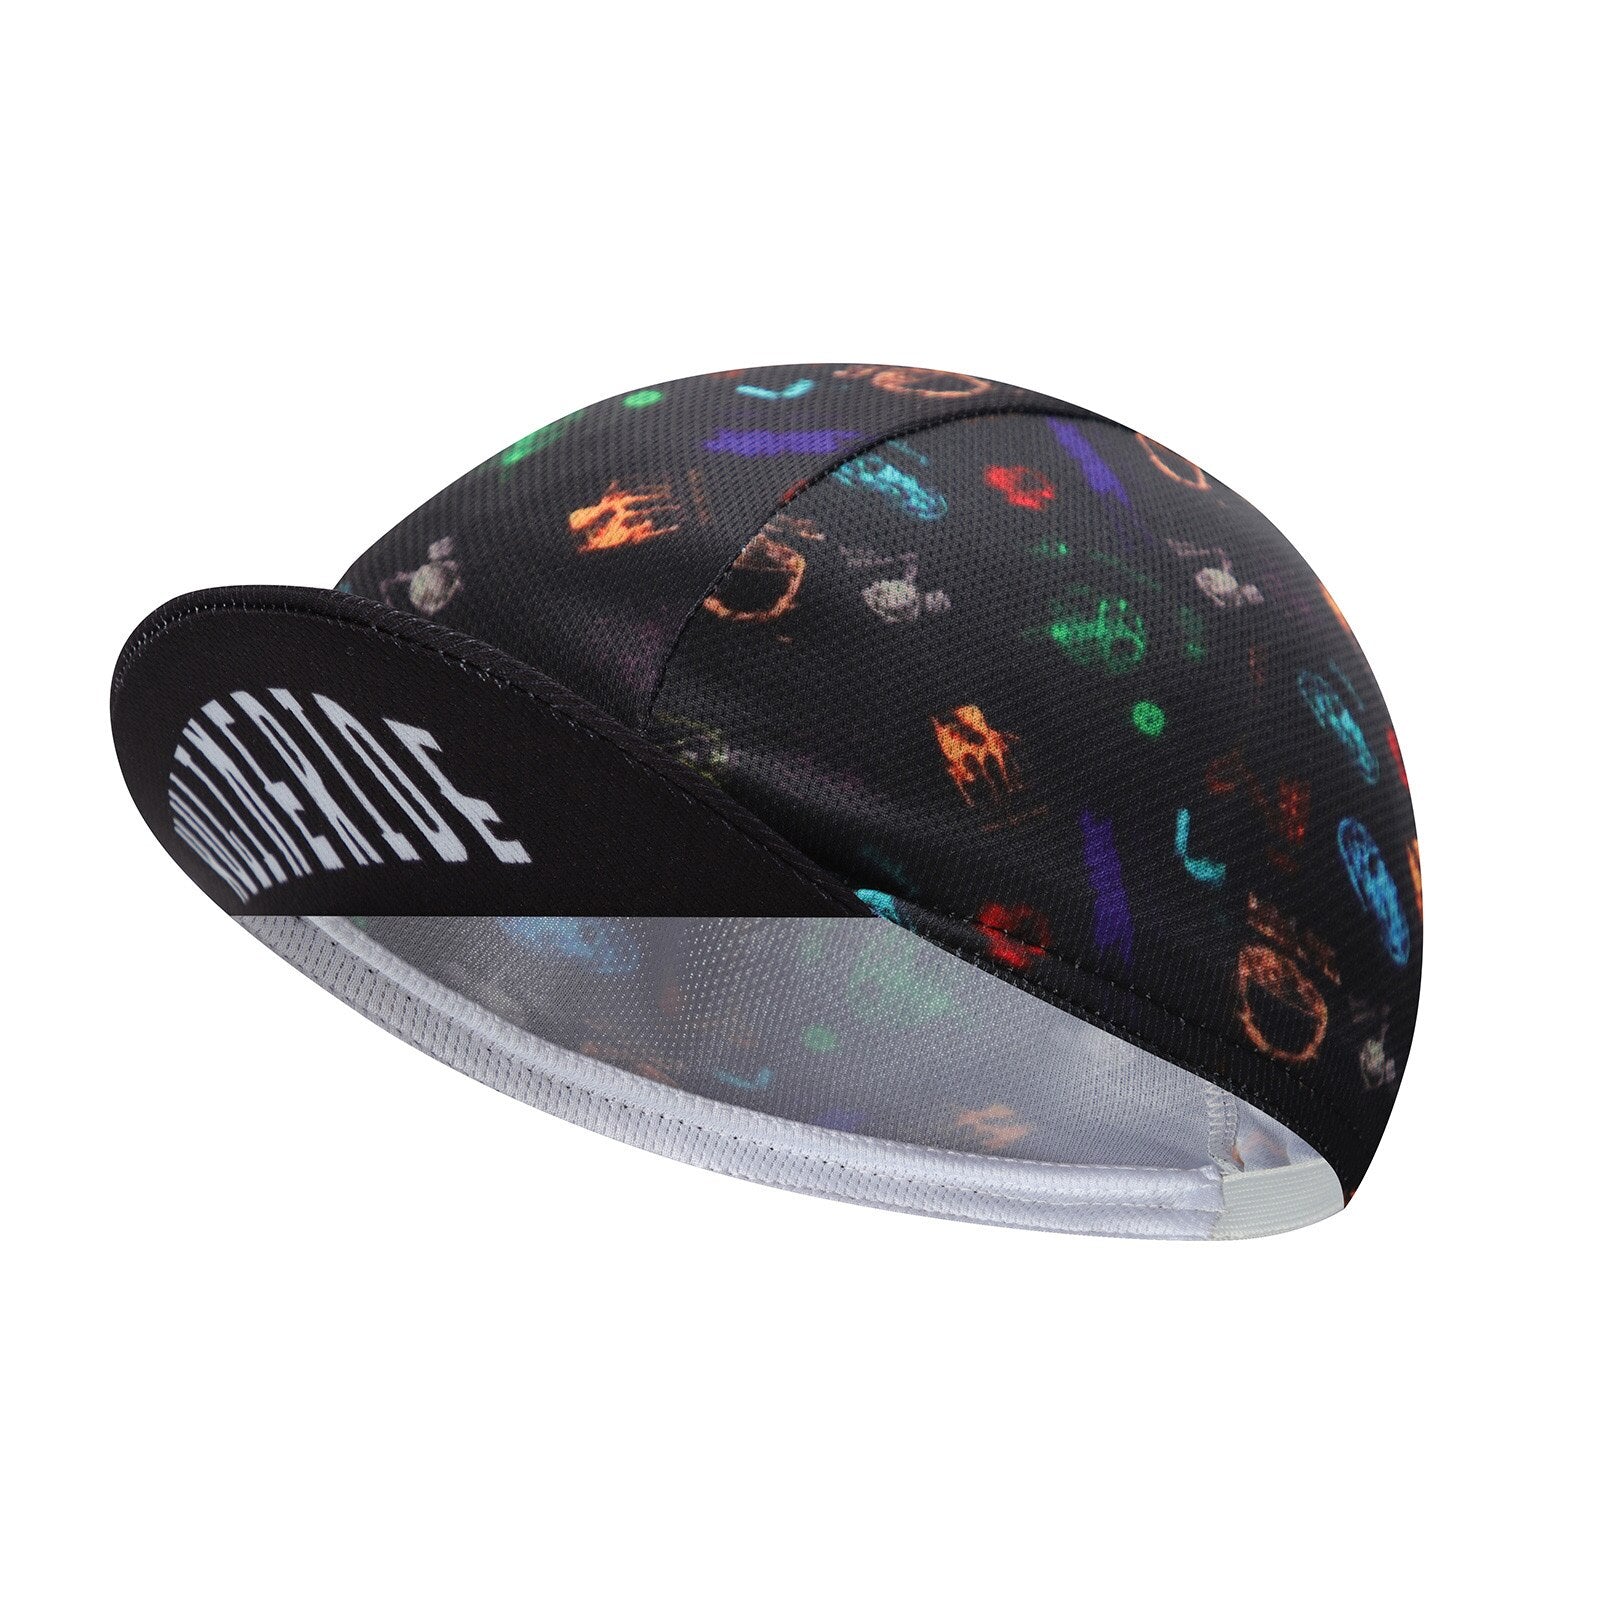 Black Cycling Cap - Polyester Cycling Hat-Under Helmet - Cycling Helmet Liner Breathable&Sweat Uptake